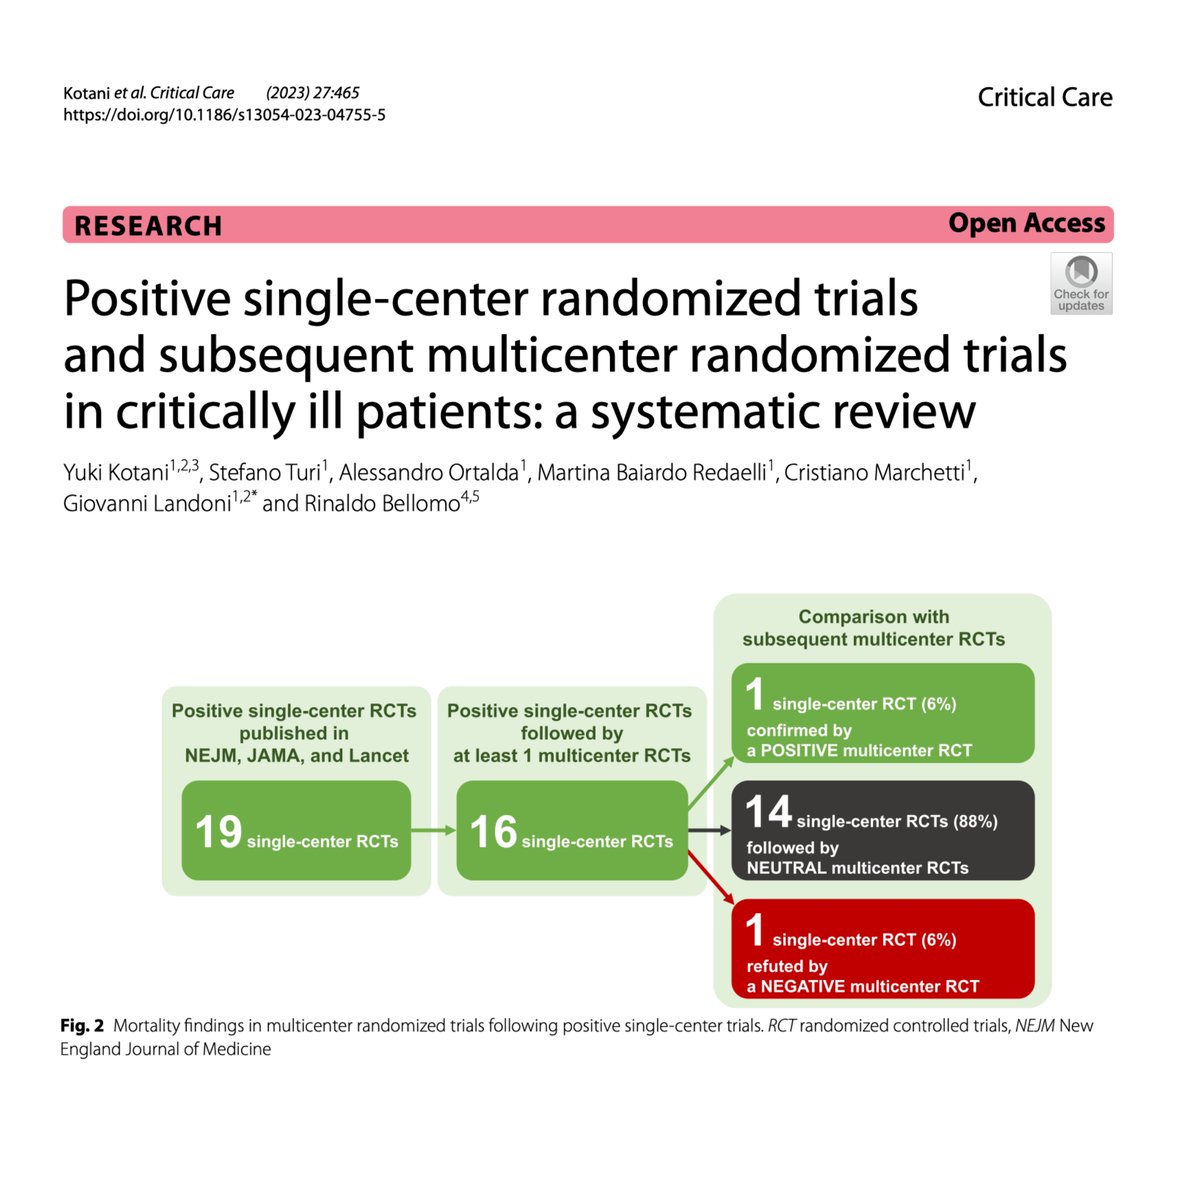 1/

Our new SR found that survival benefits shown in positive single-center RCTs published in NEJM/JAMA/Lancet were rarely replicated by subsequent multicenter RCTs in ICU settings.

Of 16 eligible sRCTs, one was followed by a negative mRCT‼️

🔓ccforum.biomedcentral.com/articles/10.11…

#FOAMcc